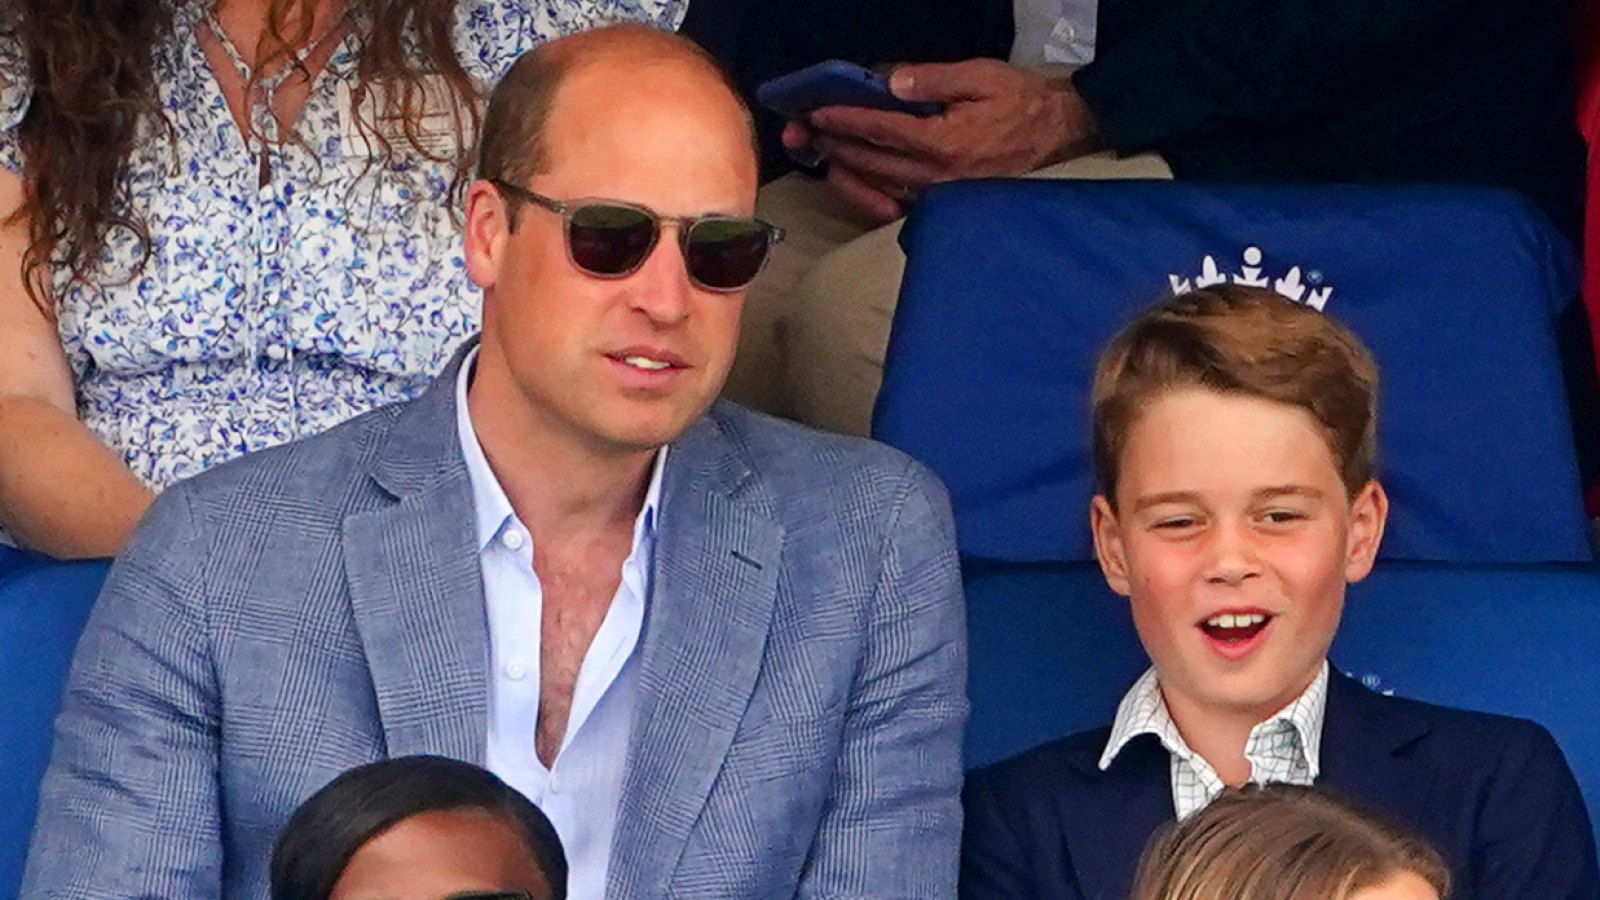 Prince George Enjoys Pizza With Prince William at a Cricket Game: Photos